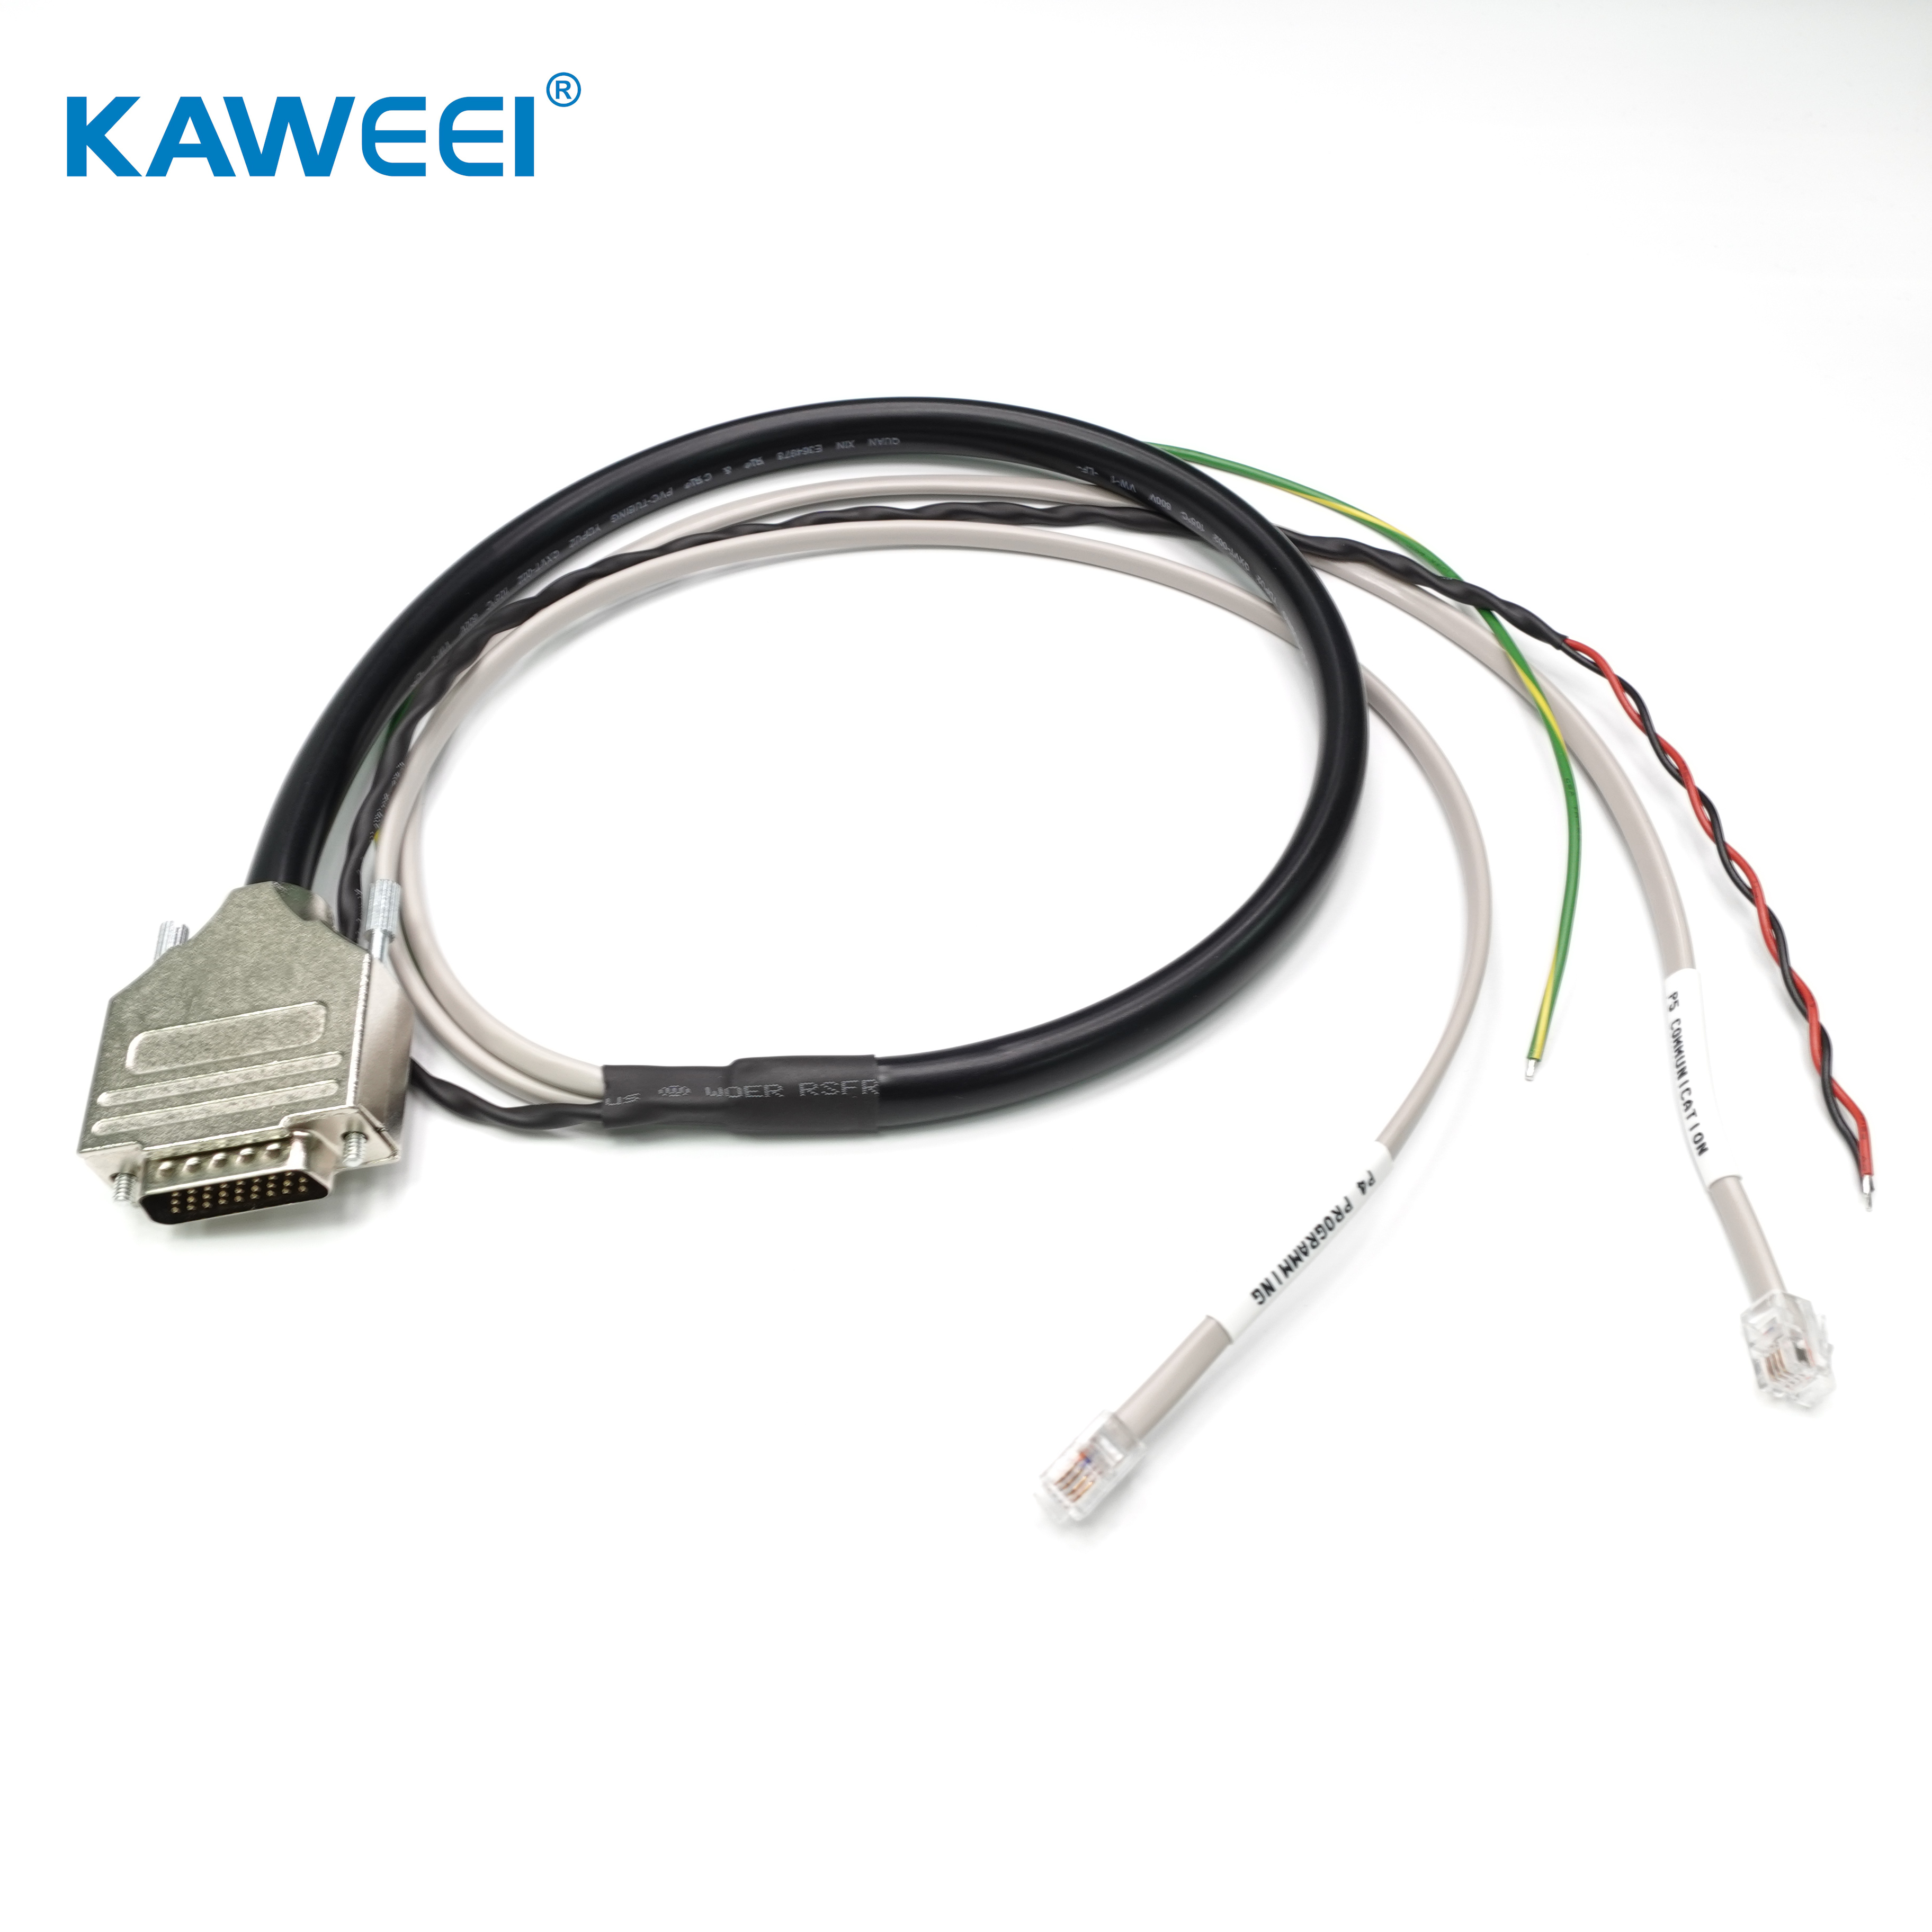 26P DB male to double RJ11 Hd data transmissioncable assemblies high-speed internet connection Communication cable Data transmission cable